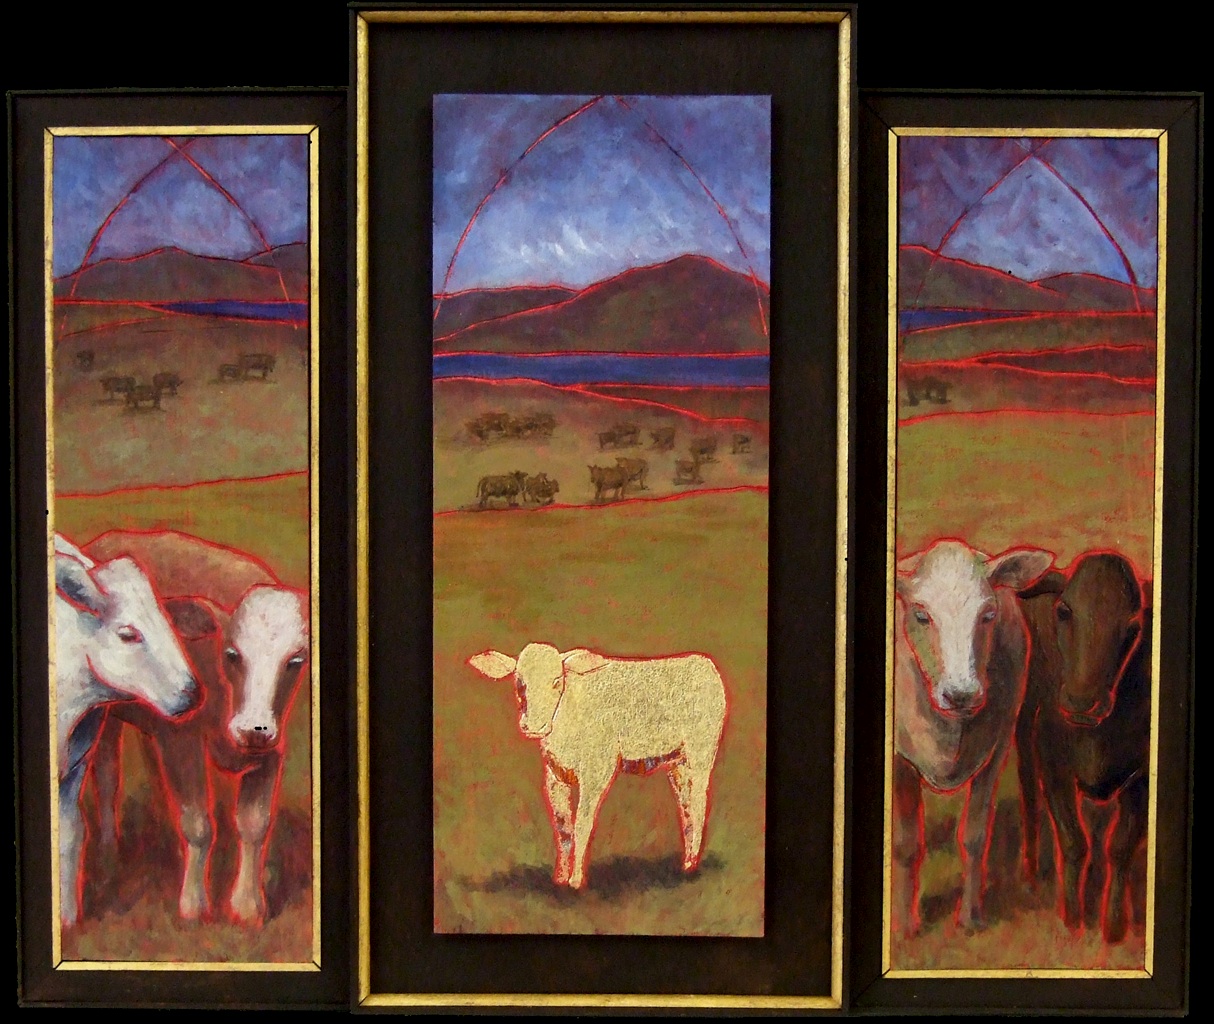 Amy Gray, "Sacred Cows," 2011, gold leaf and paint on wood